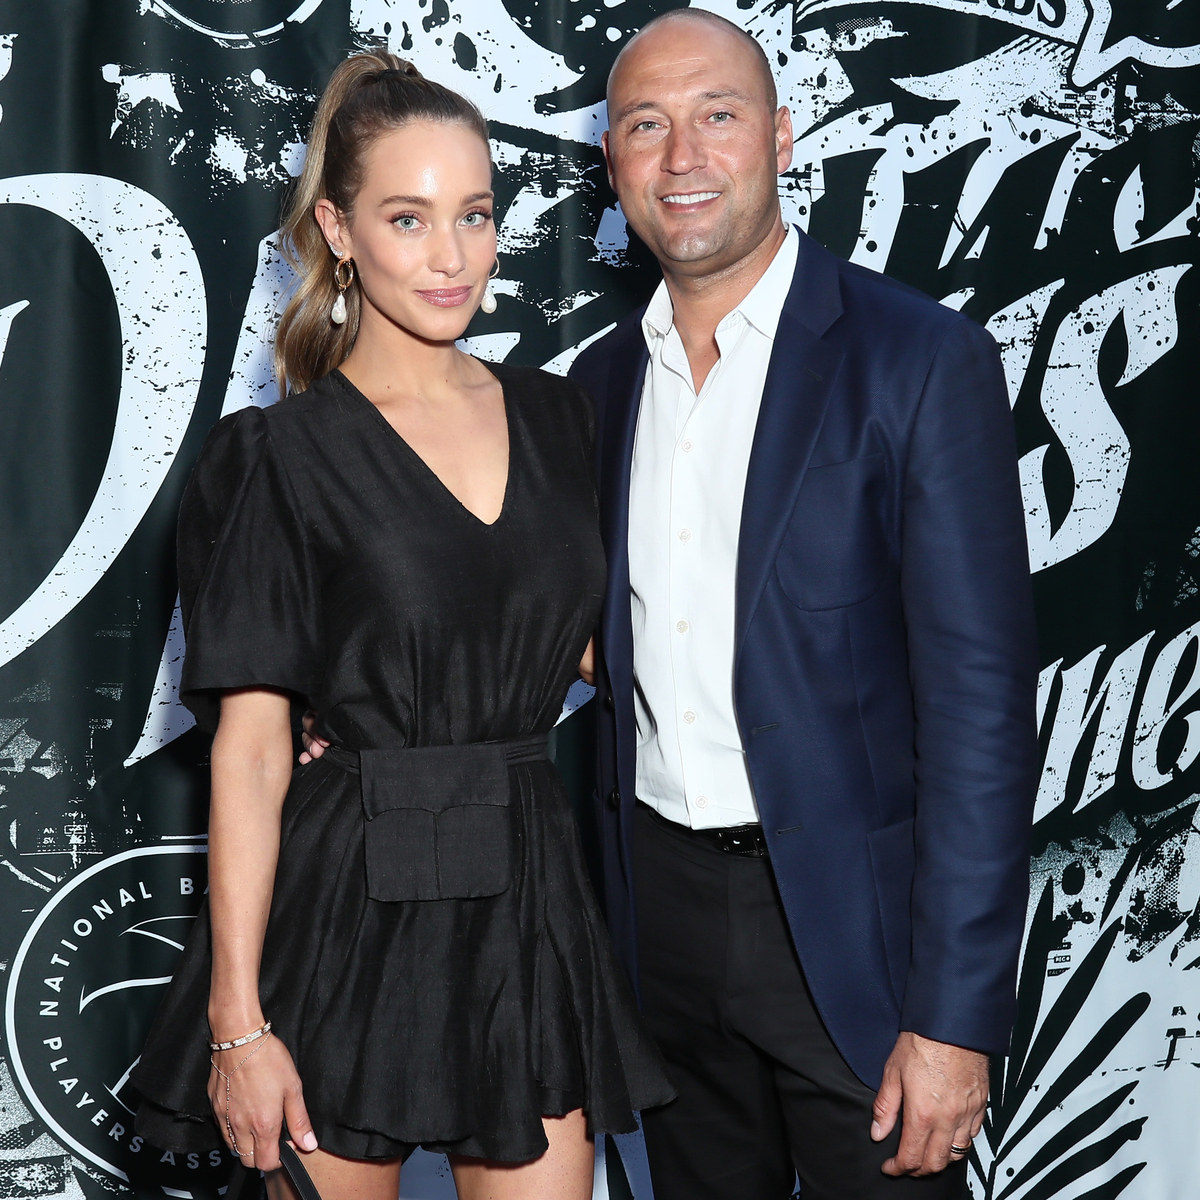 Derek Jeter News, Pictures, and Videos - E! Online